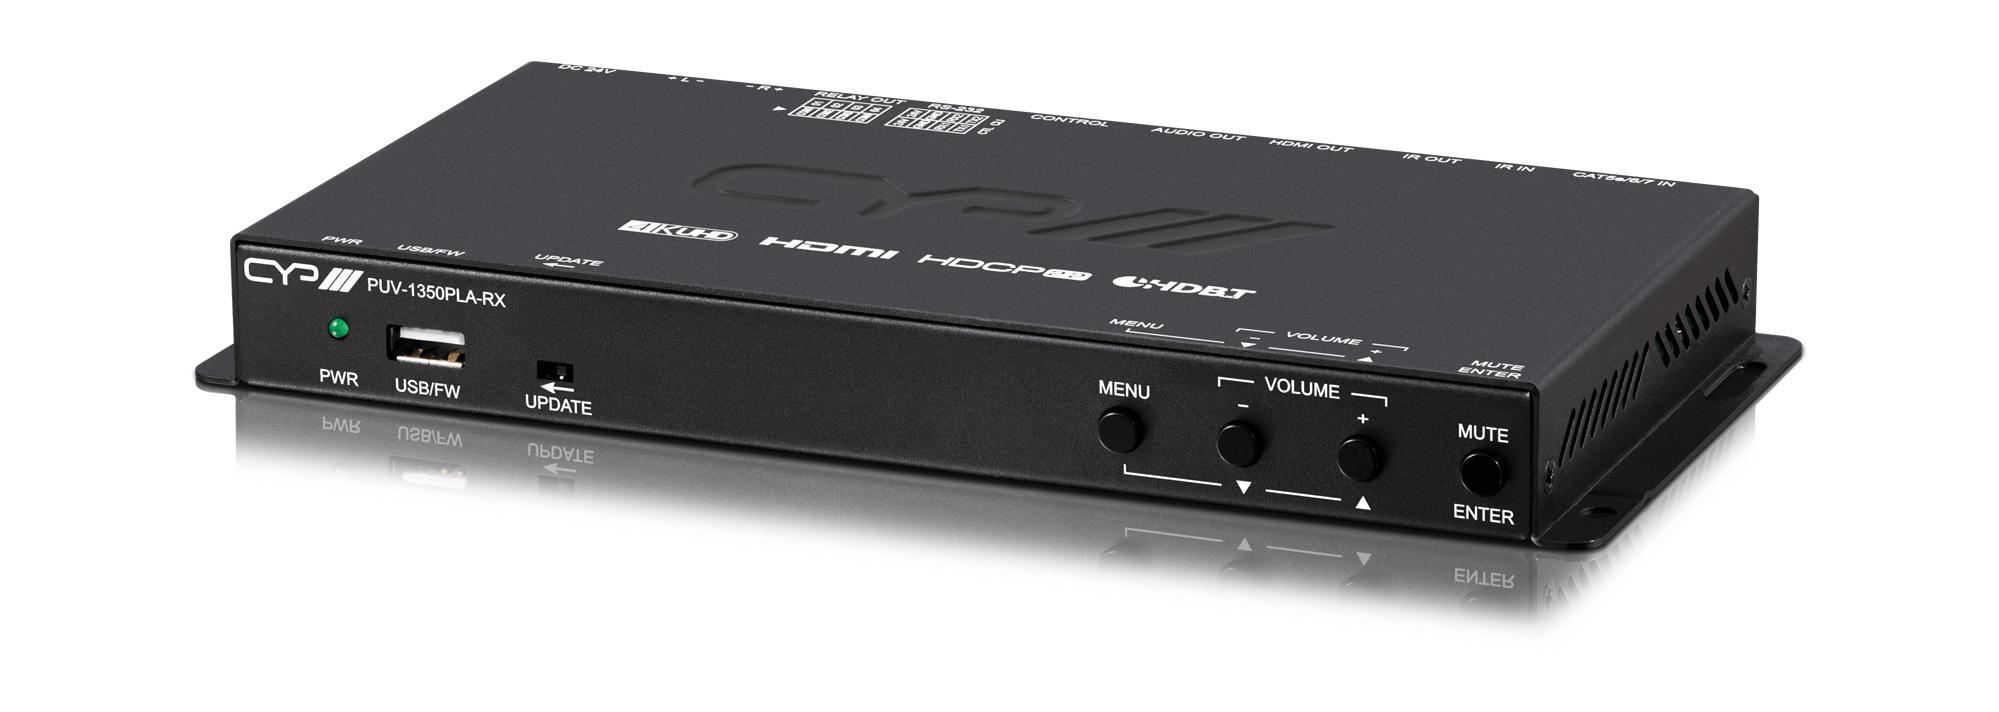 PUV-1350PLA-RX - UHD+ HDBaseT Receiver with Amplifier